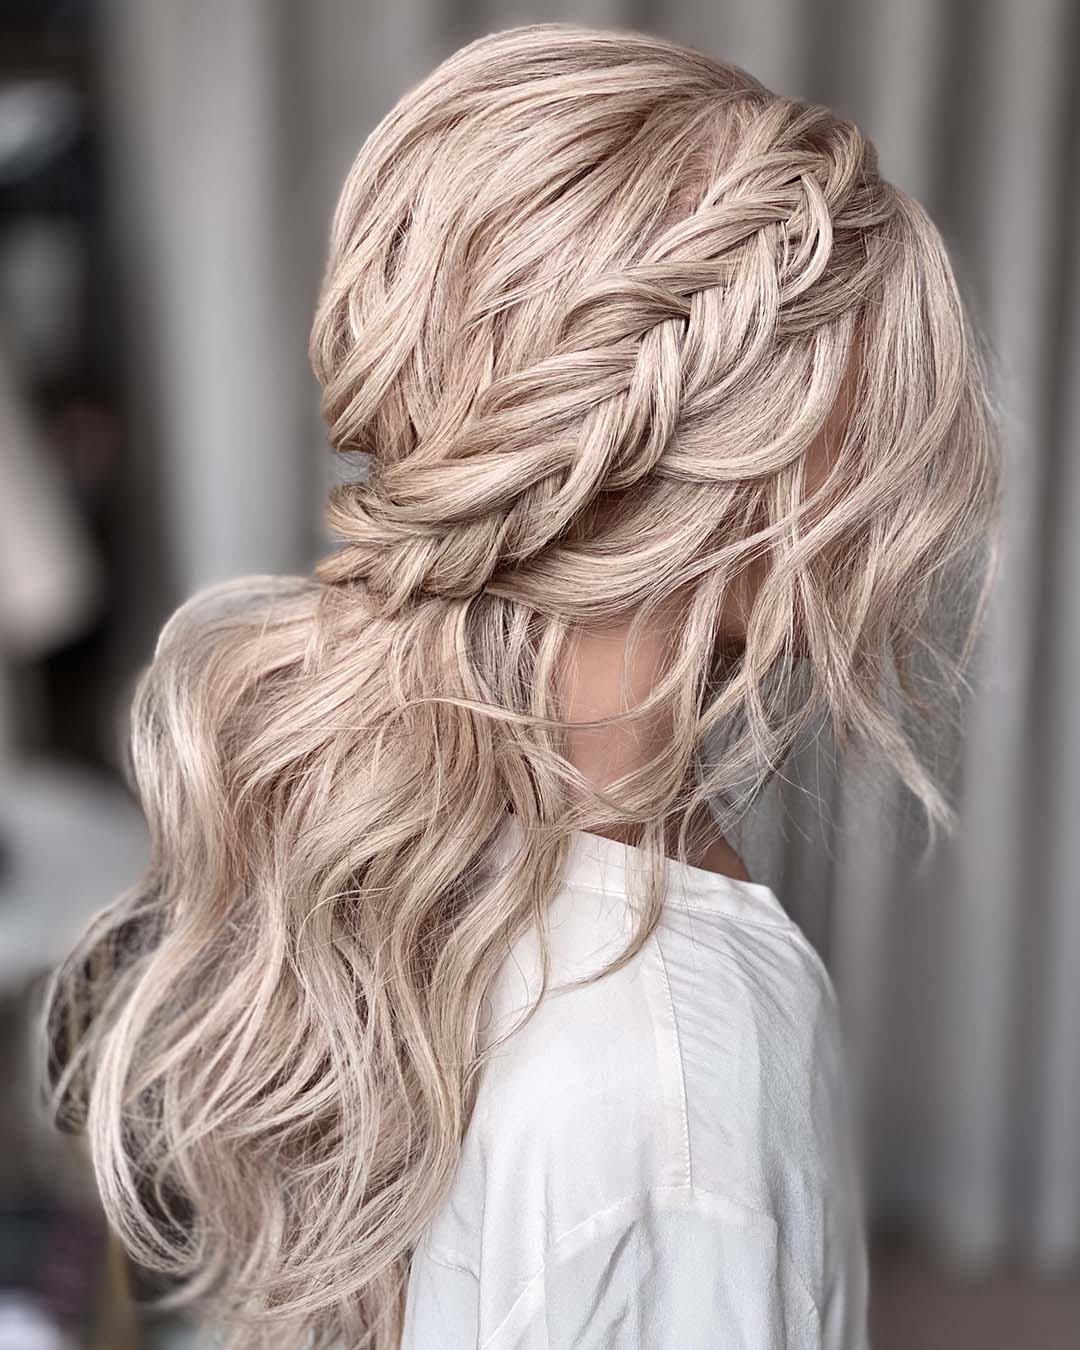 braided ponytail for wedding hairstyle